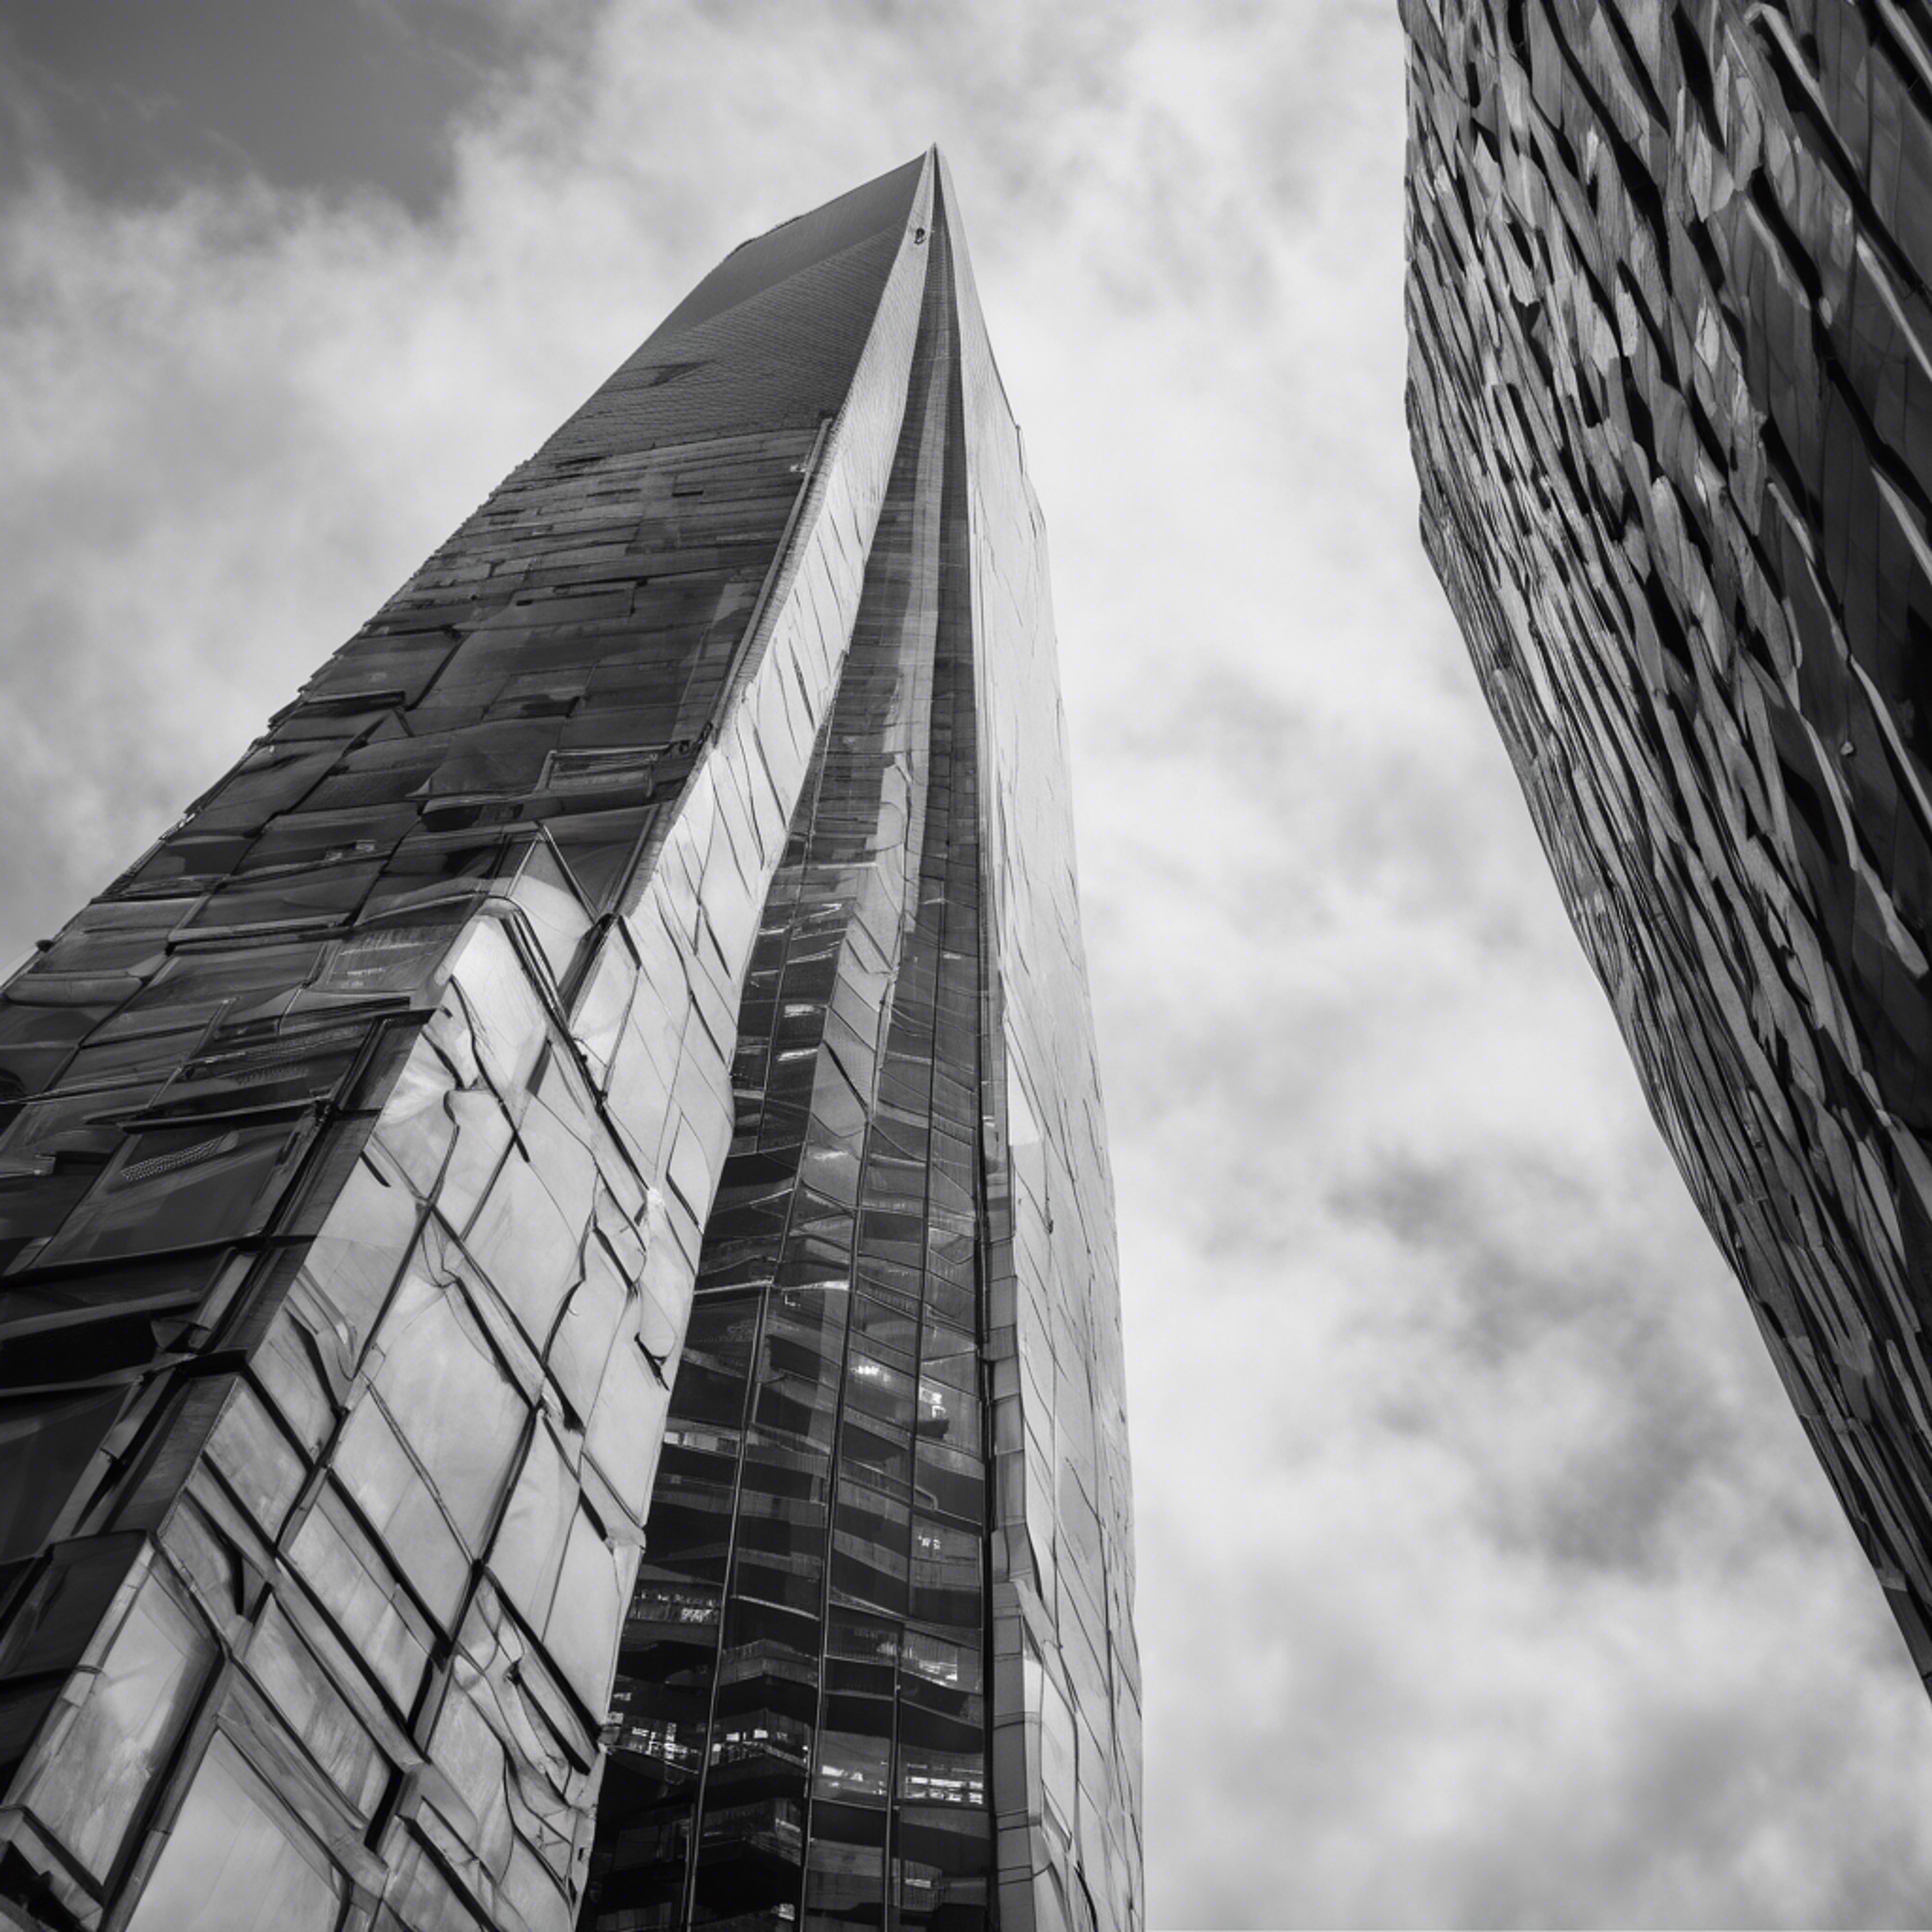 A black and white image of a modern skyscraper with gray, glassy texture. Wallpaper[09b62f9663d6456b821a]